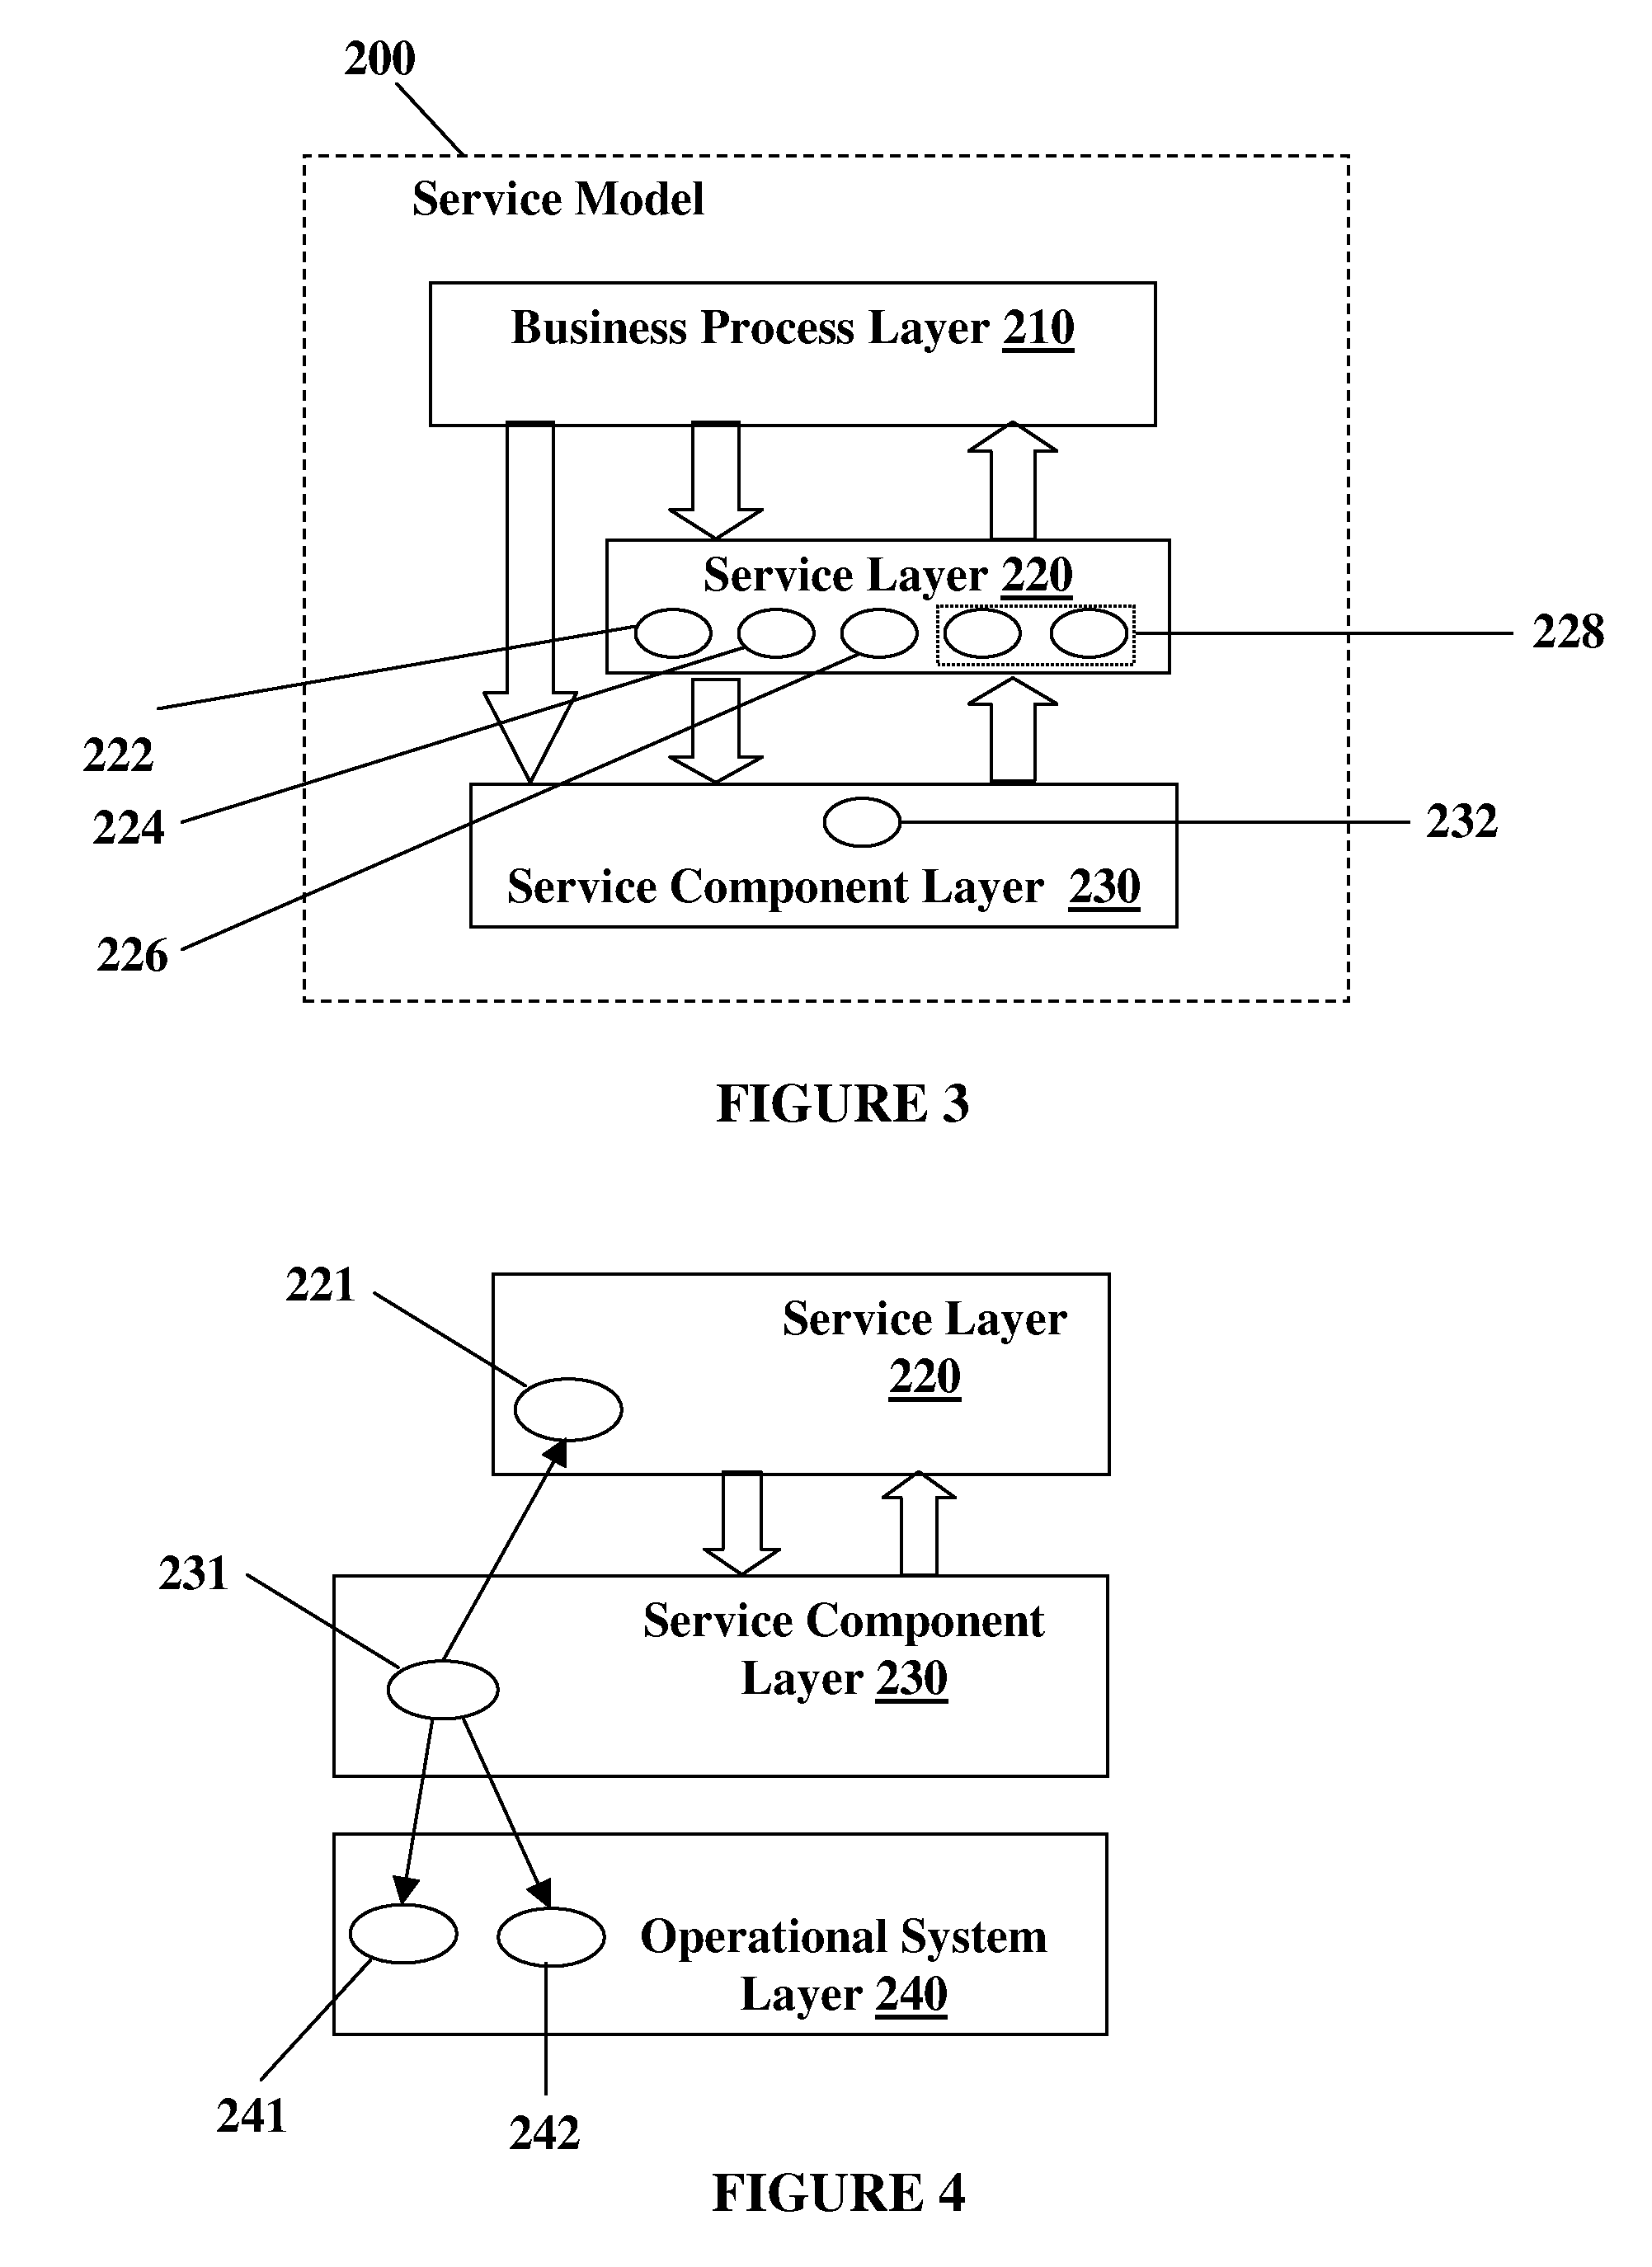 Method and apparatus for the design and development of service-oriented architecture (SOA) solutions